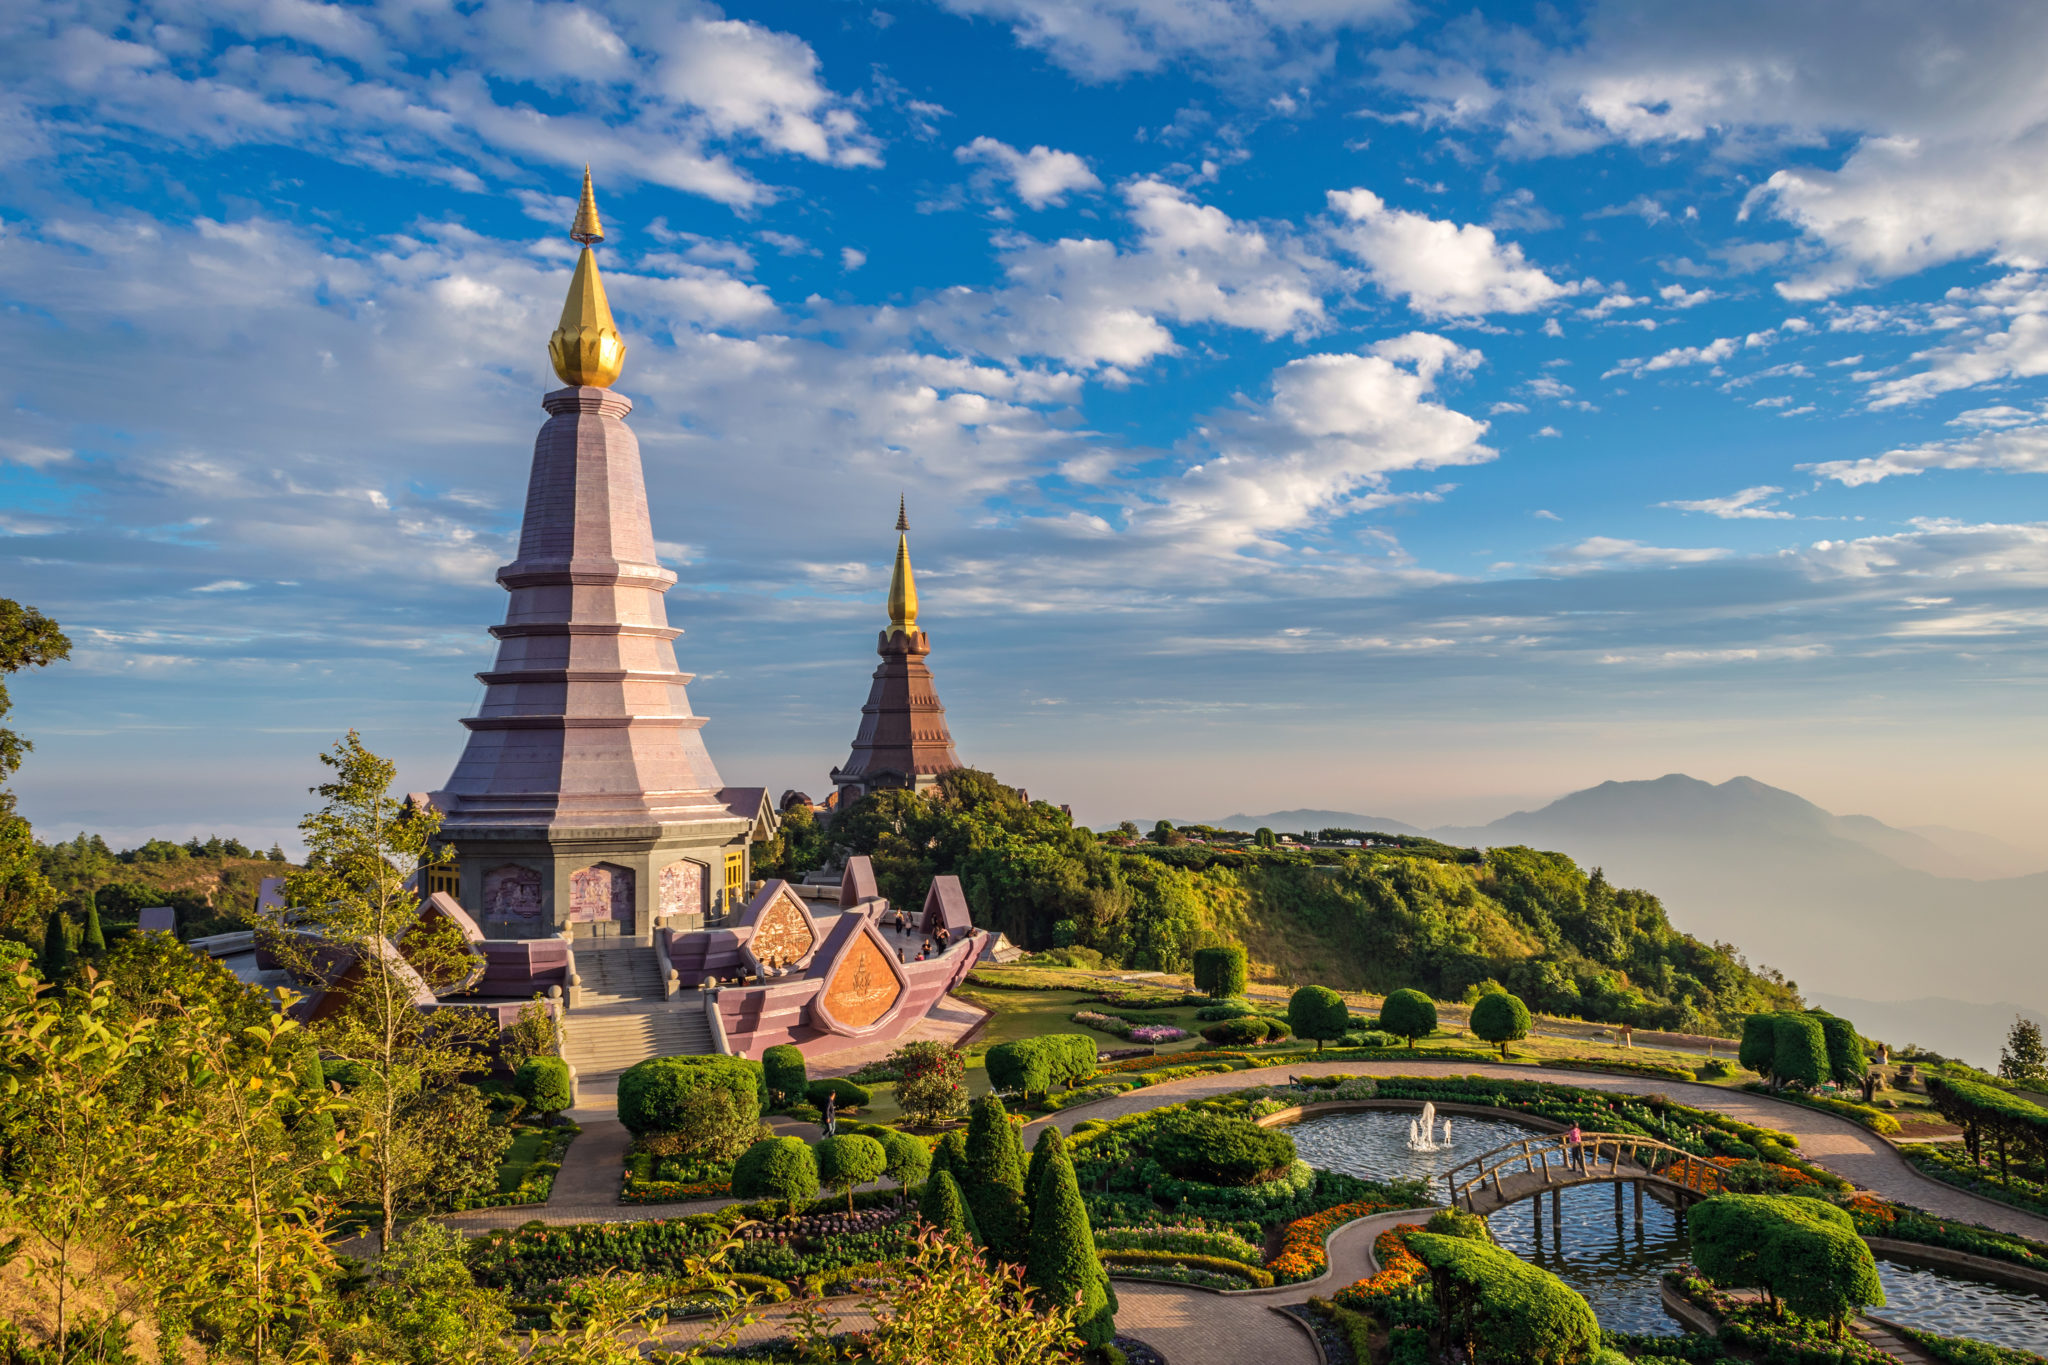 Thailand Travel Guide Your Ultimate Resource for Exploring the Land of Smiles